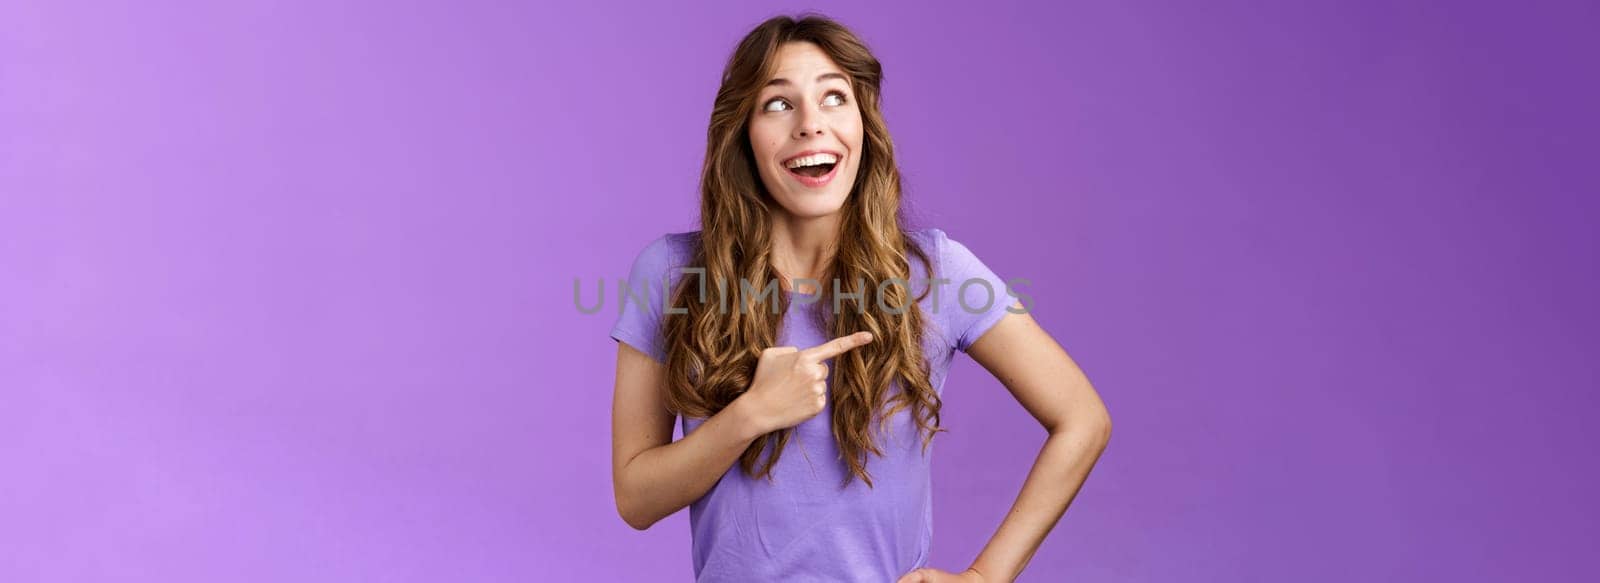 Dreamy wondered impressed cute lively excited positive girl feel happy travel abroad explore new city tourist trip smiling broadly contemplate awesome view look pointing left grinning purple wall. Lifestyle.